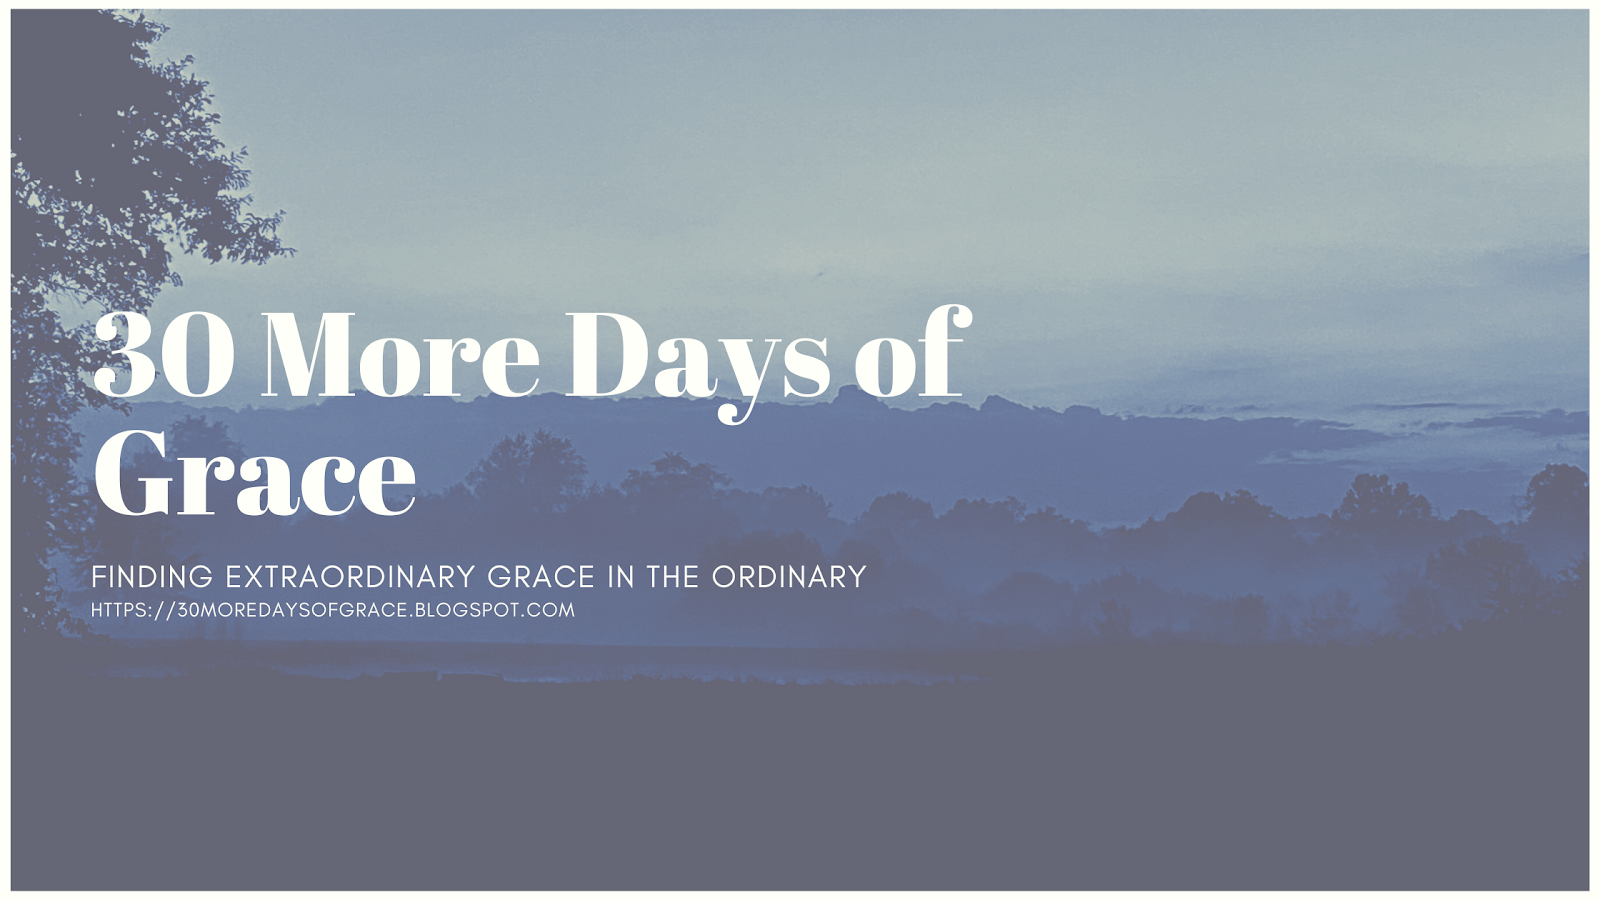 30 More Days of Grace